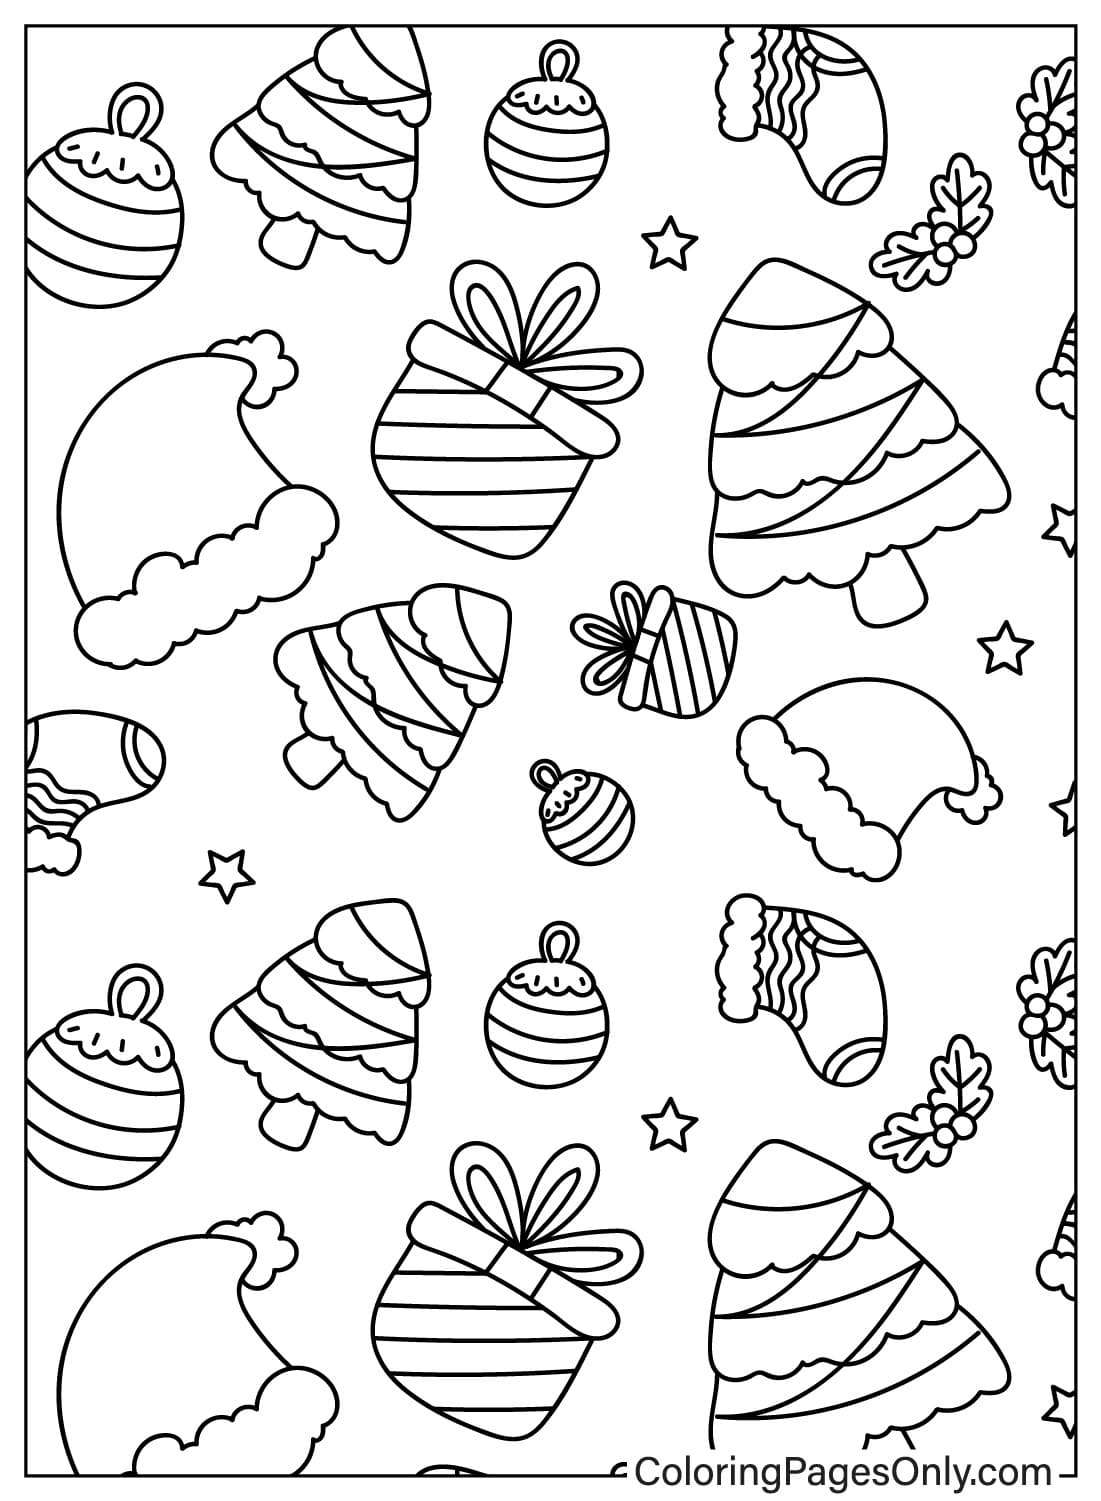 Christmas Pattern Coloring Sheet for Kids from Christmas Pattern